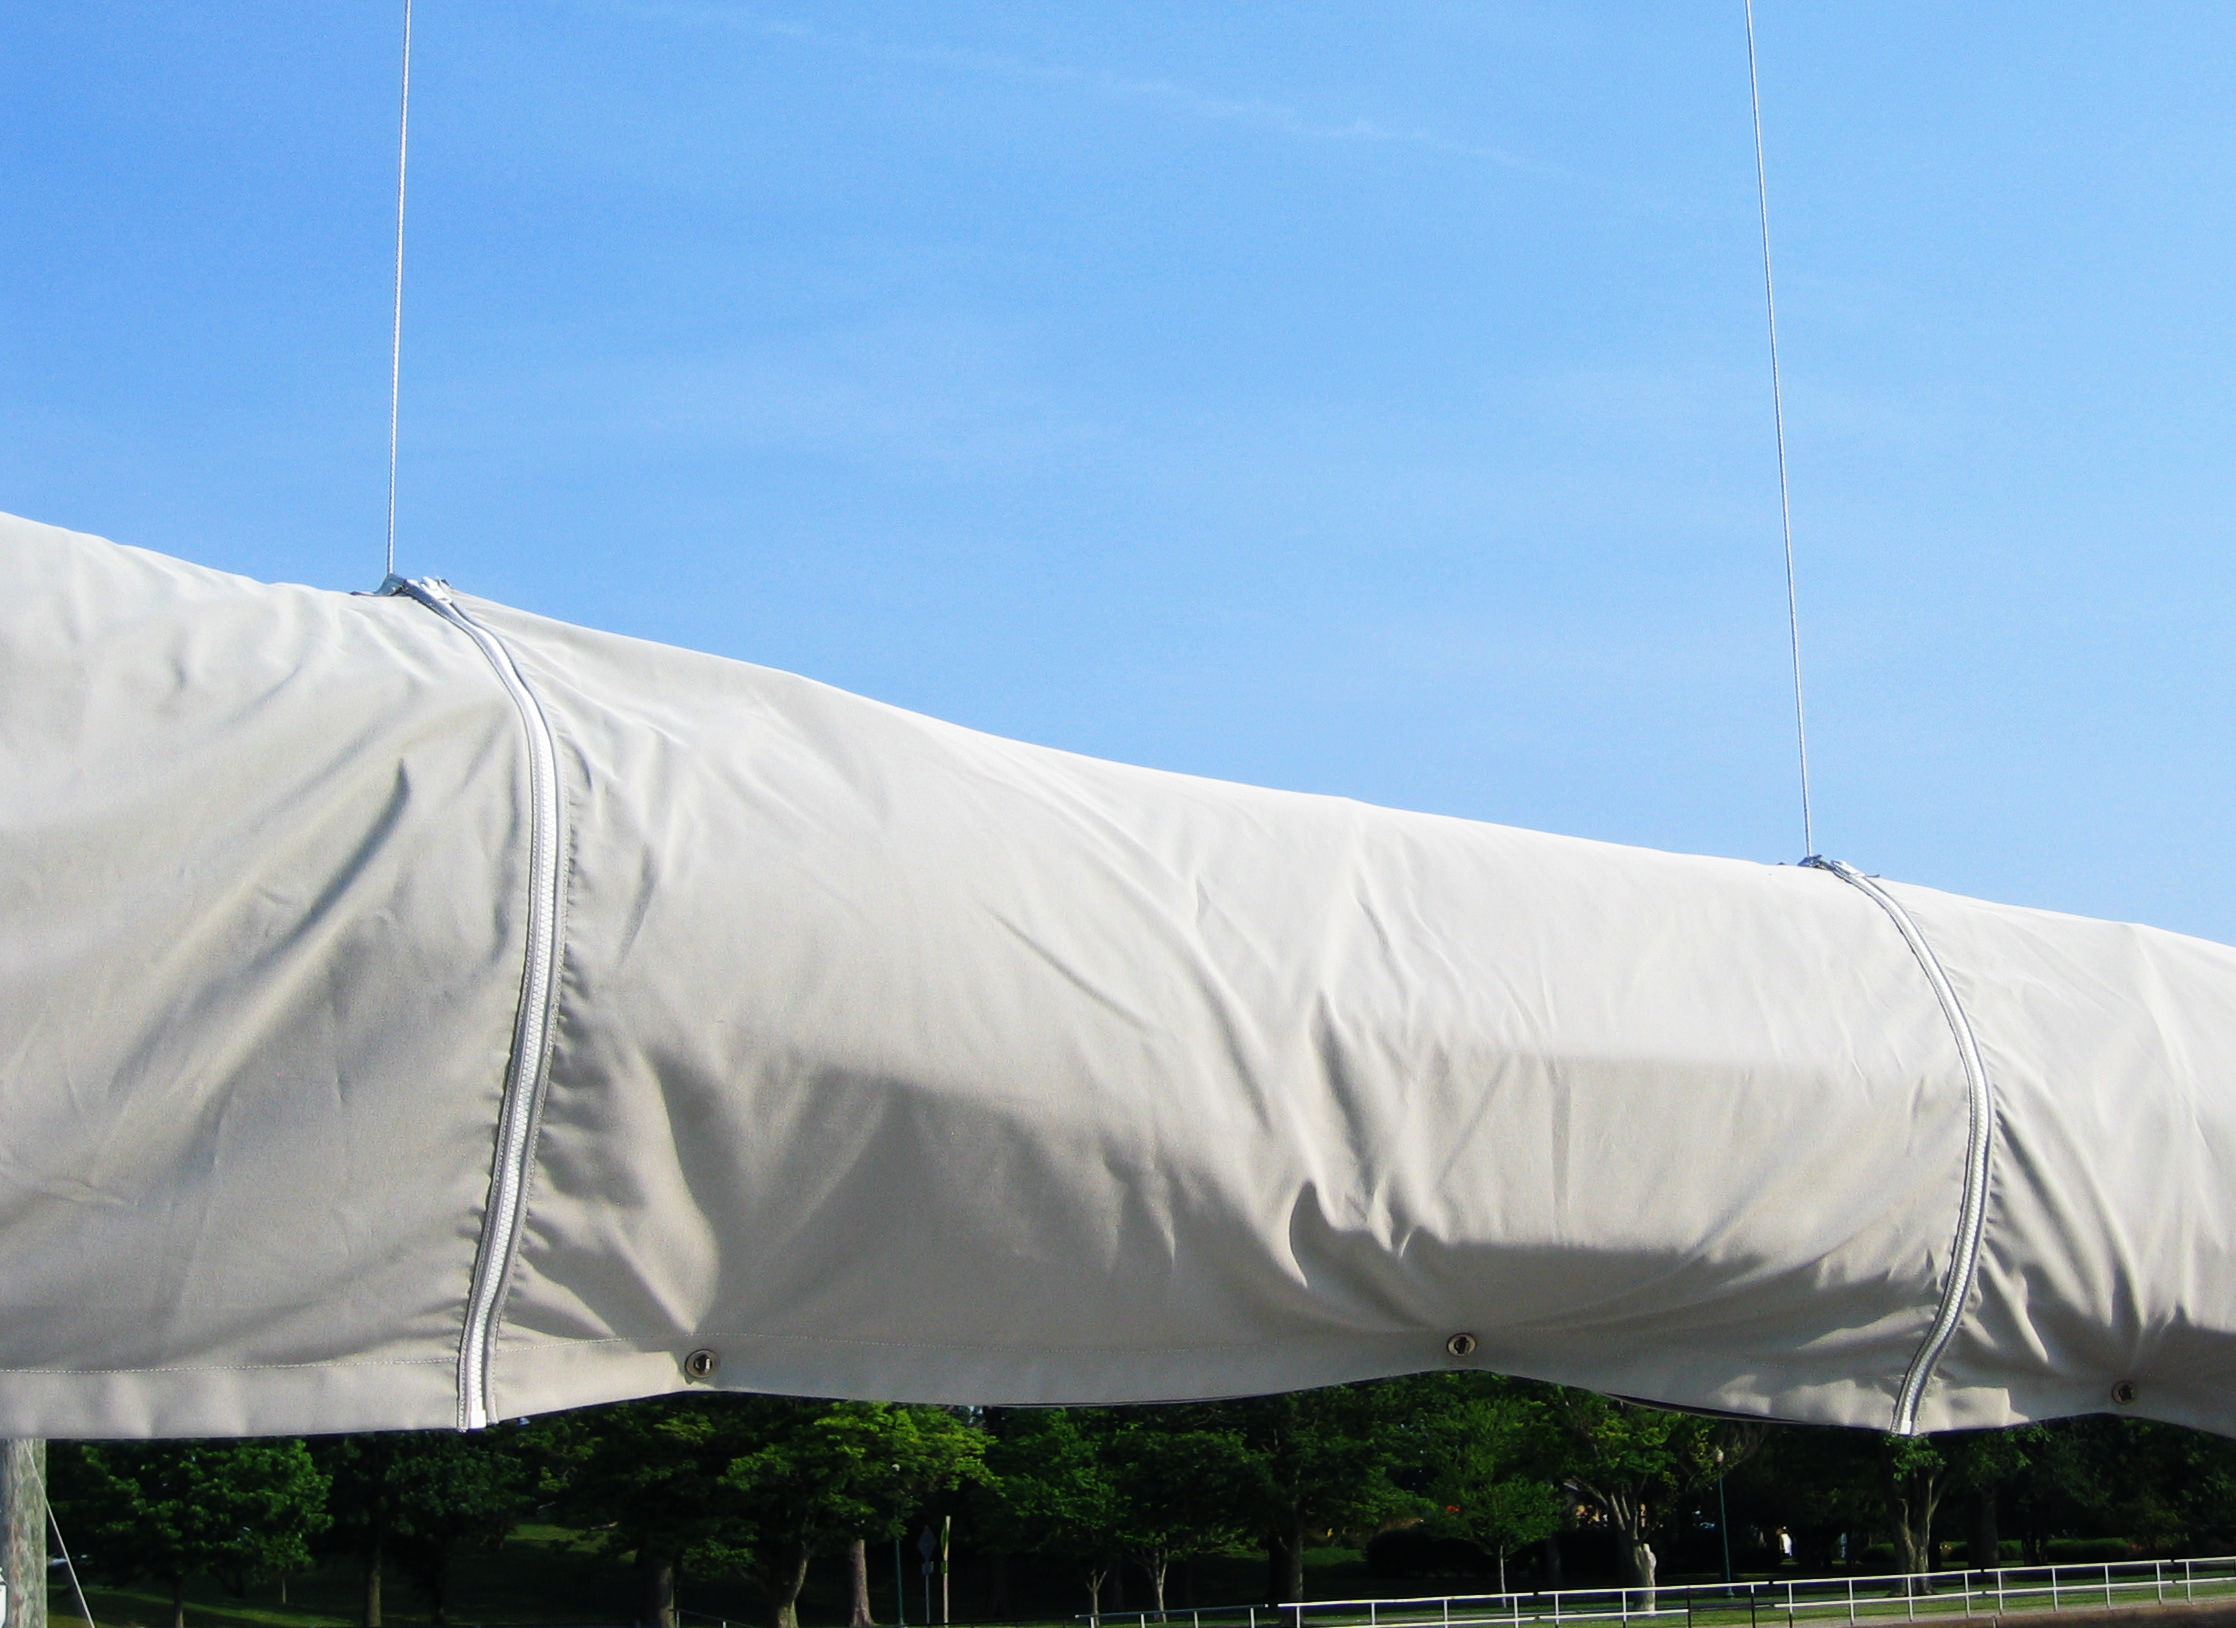 A close up of the carefully placed zipper slits in a mainsail cover.